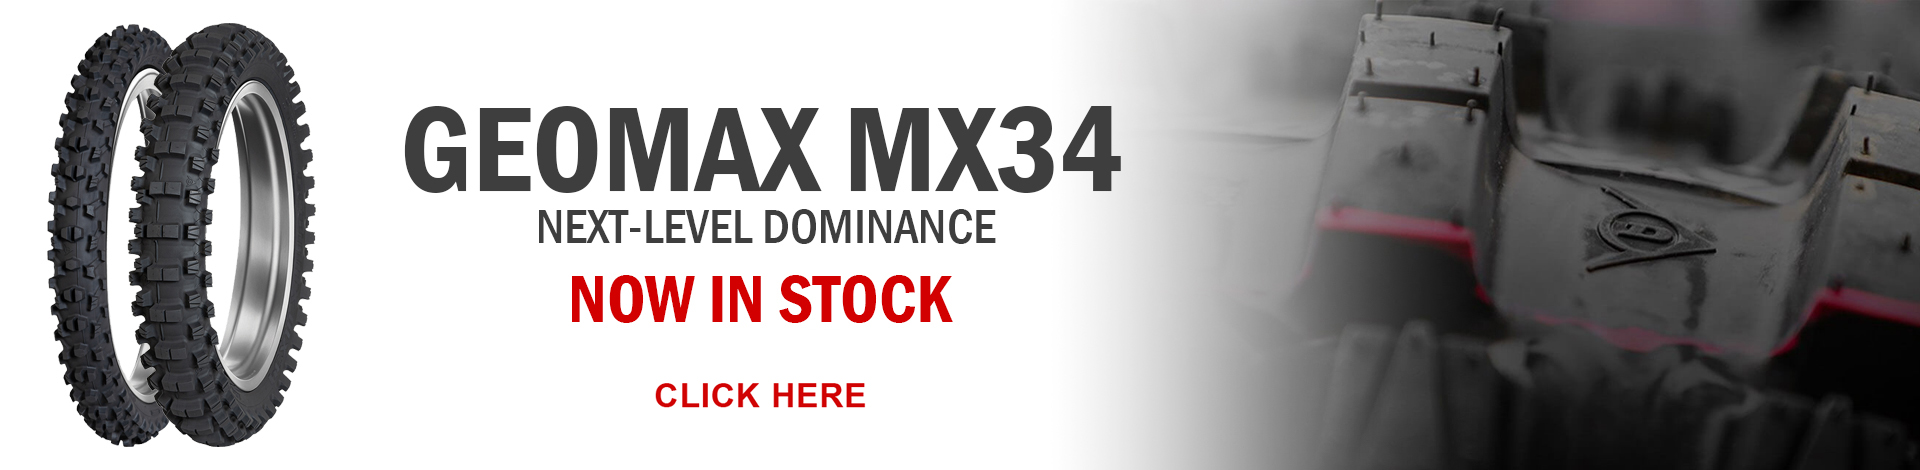 Dunlop GEOMAX MX34 now in stock!